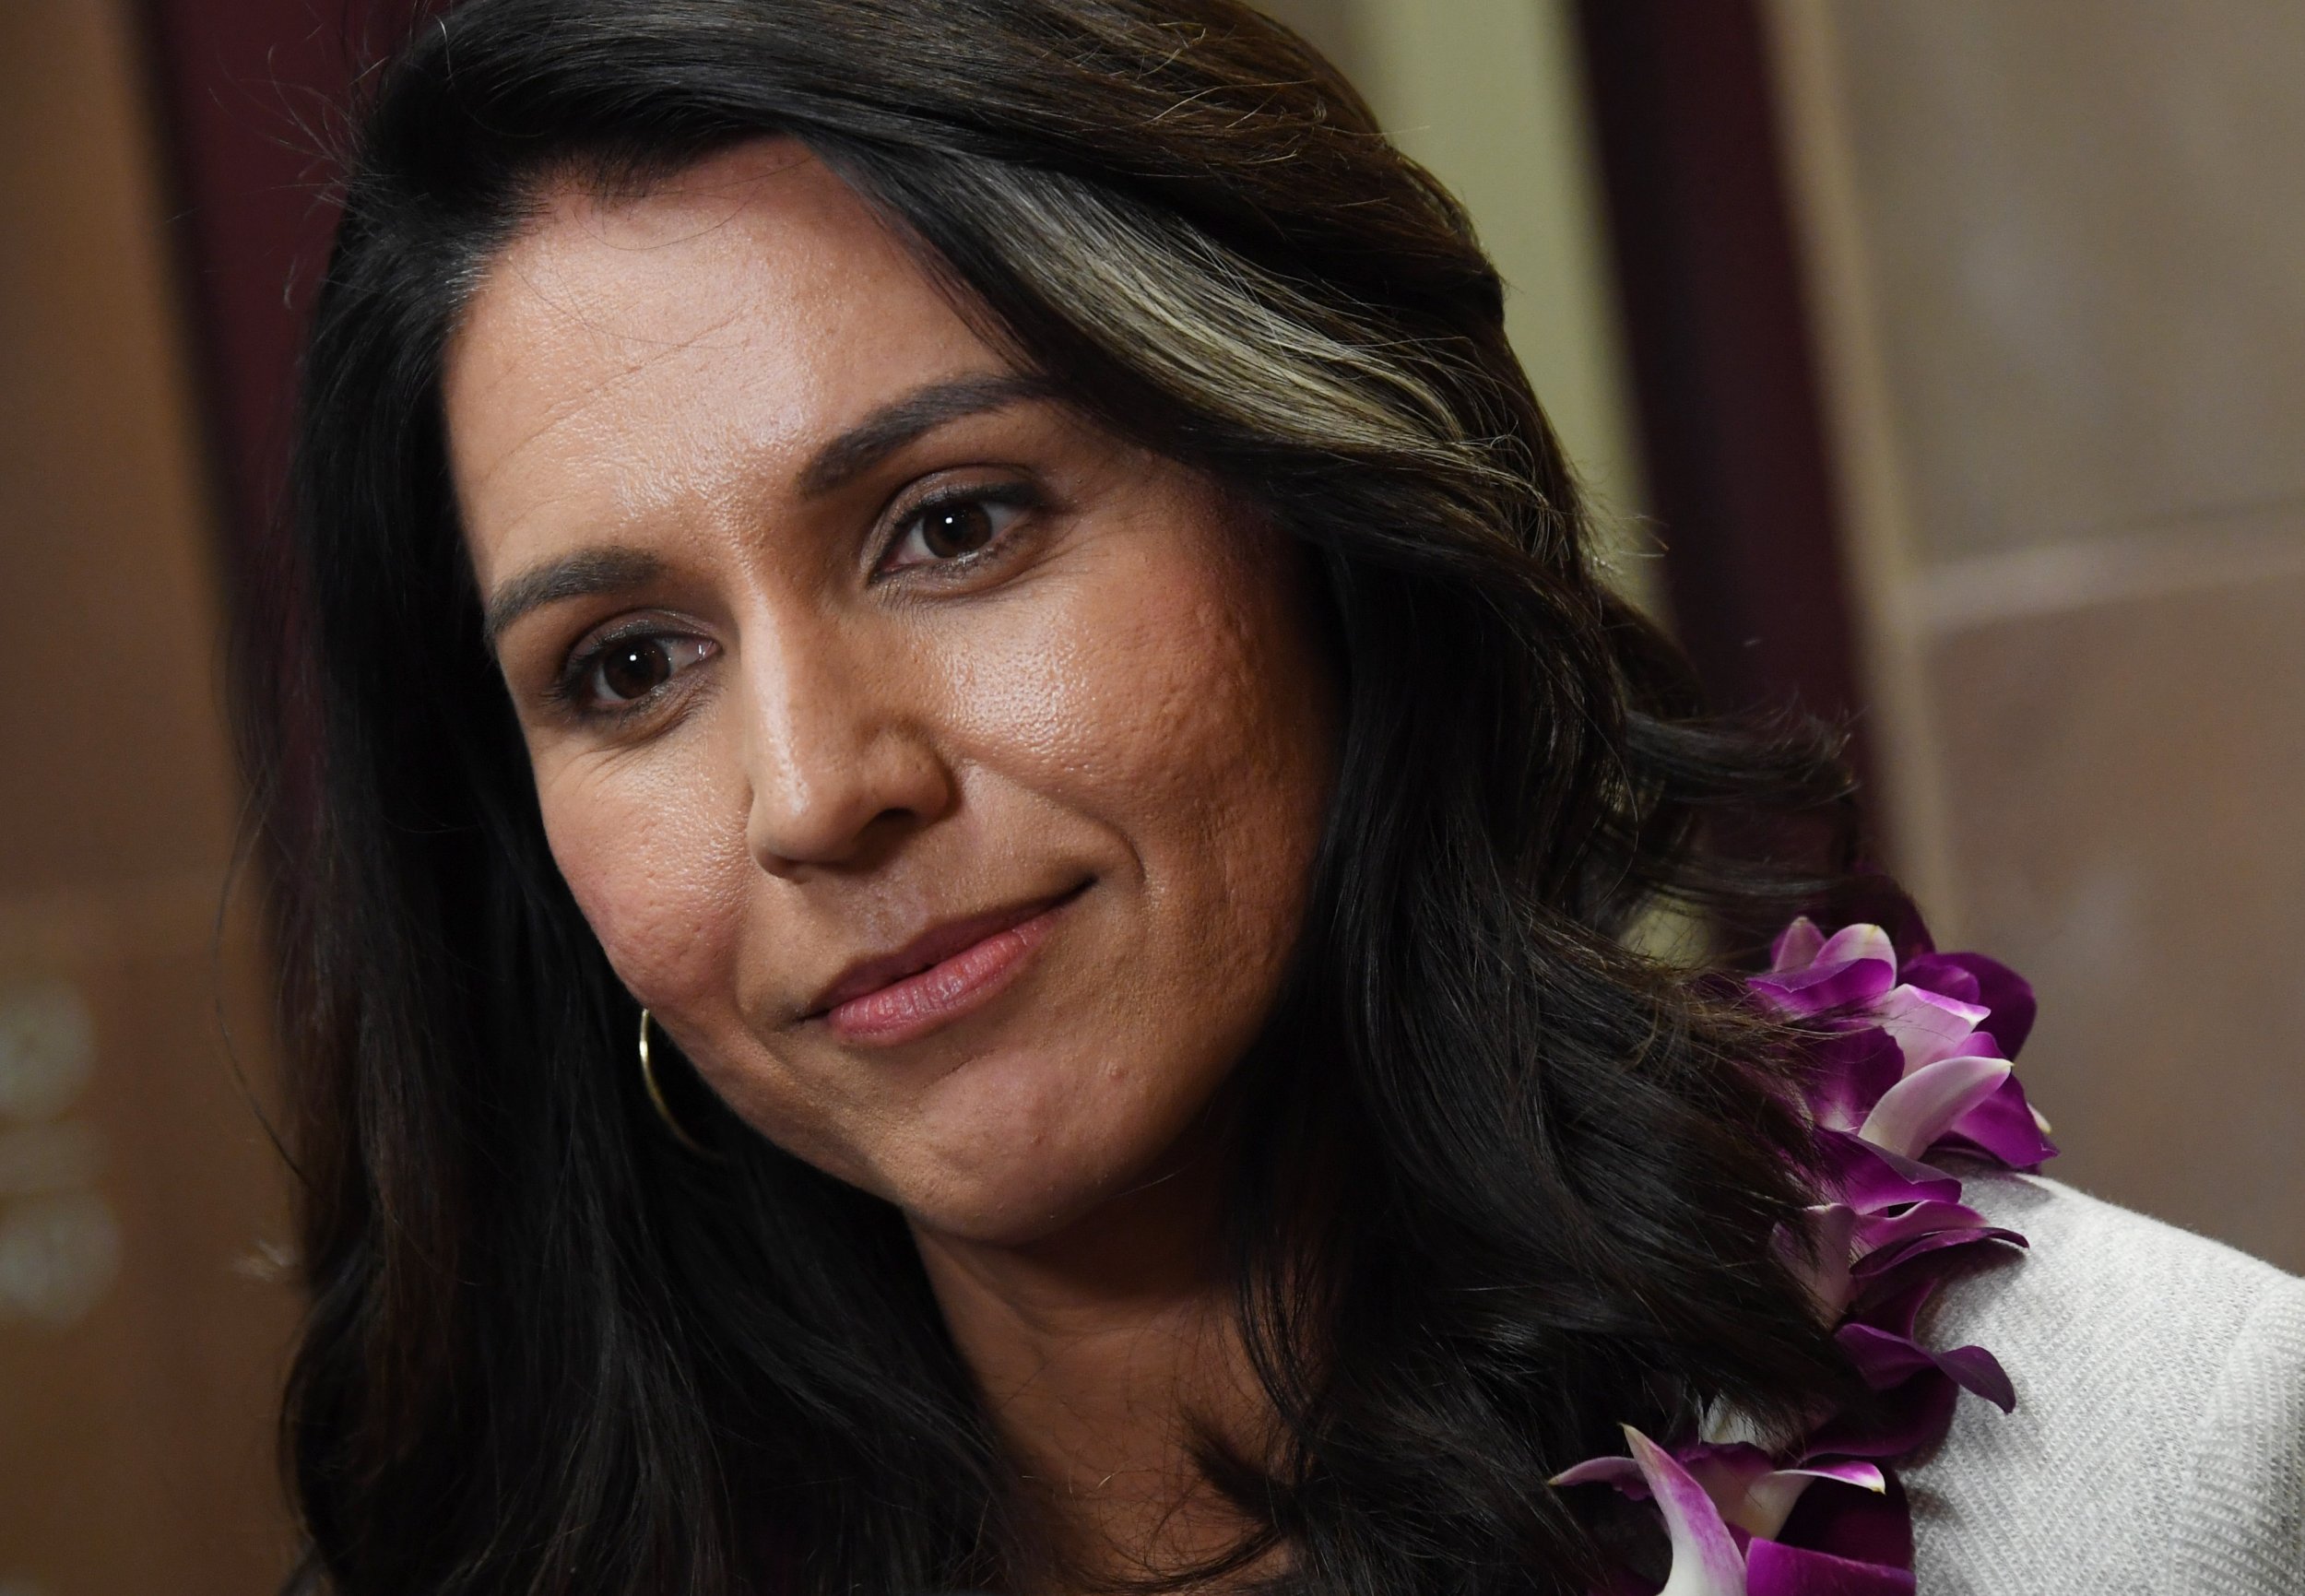 Trump Not Guilty Good For US Tulsi Gabbard Says On Mueller Report